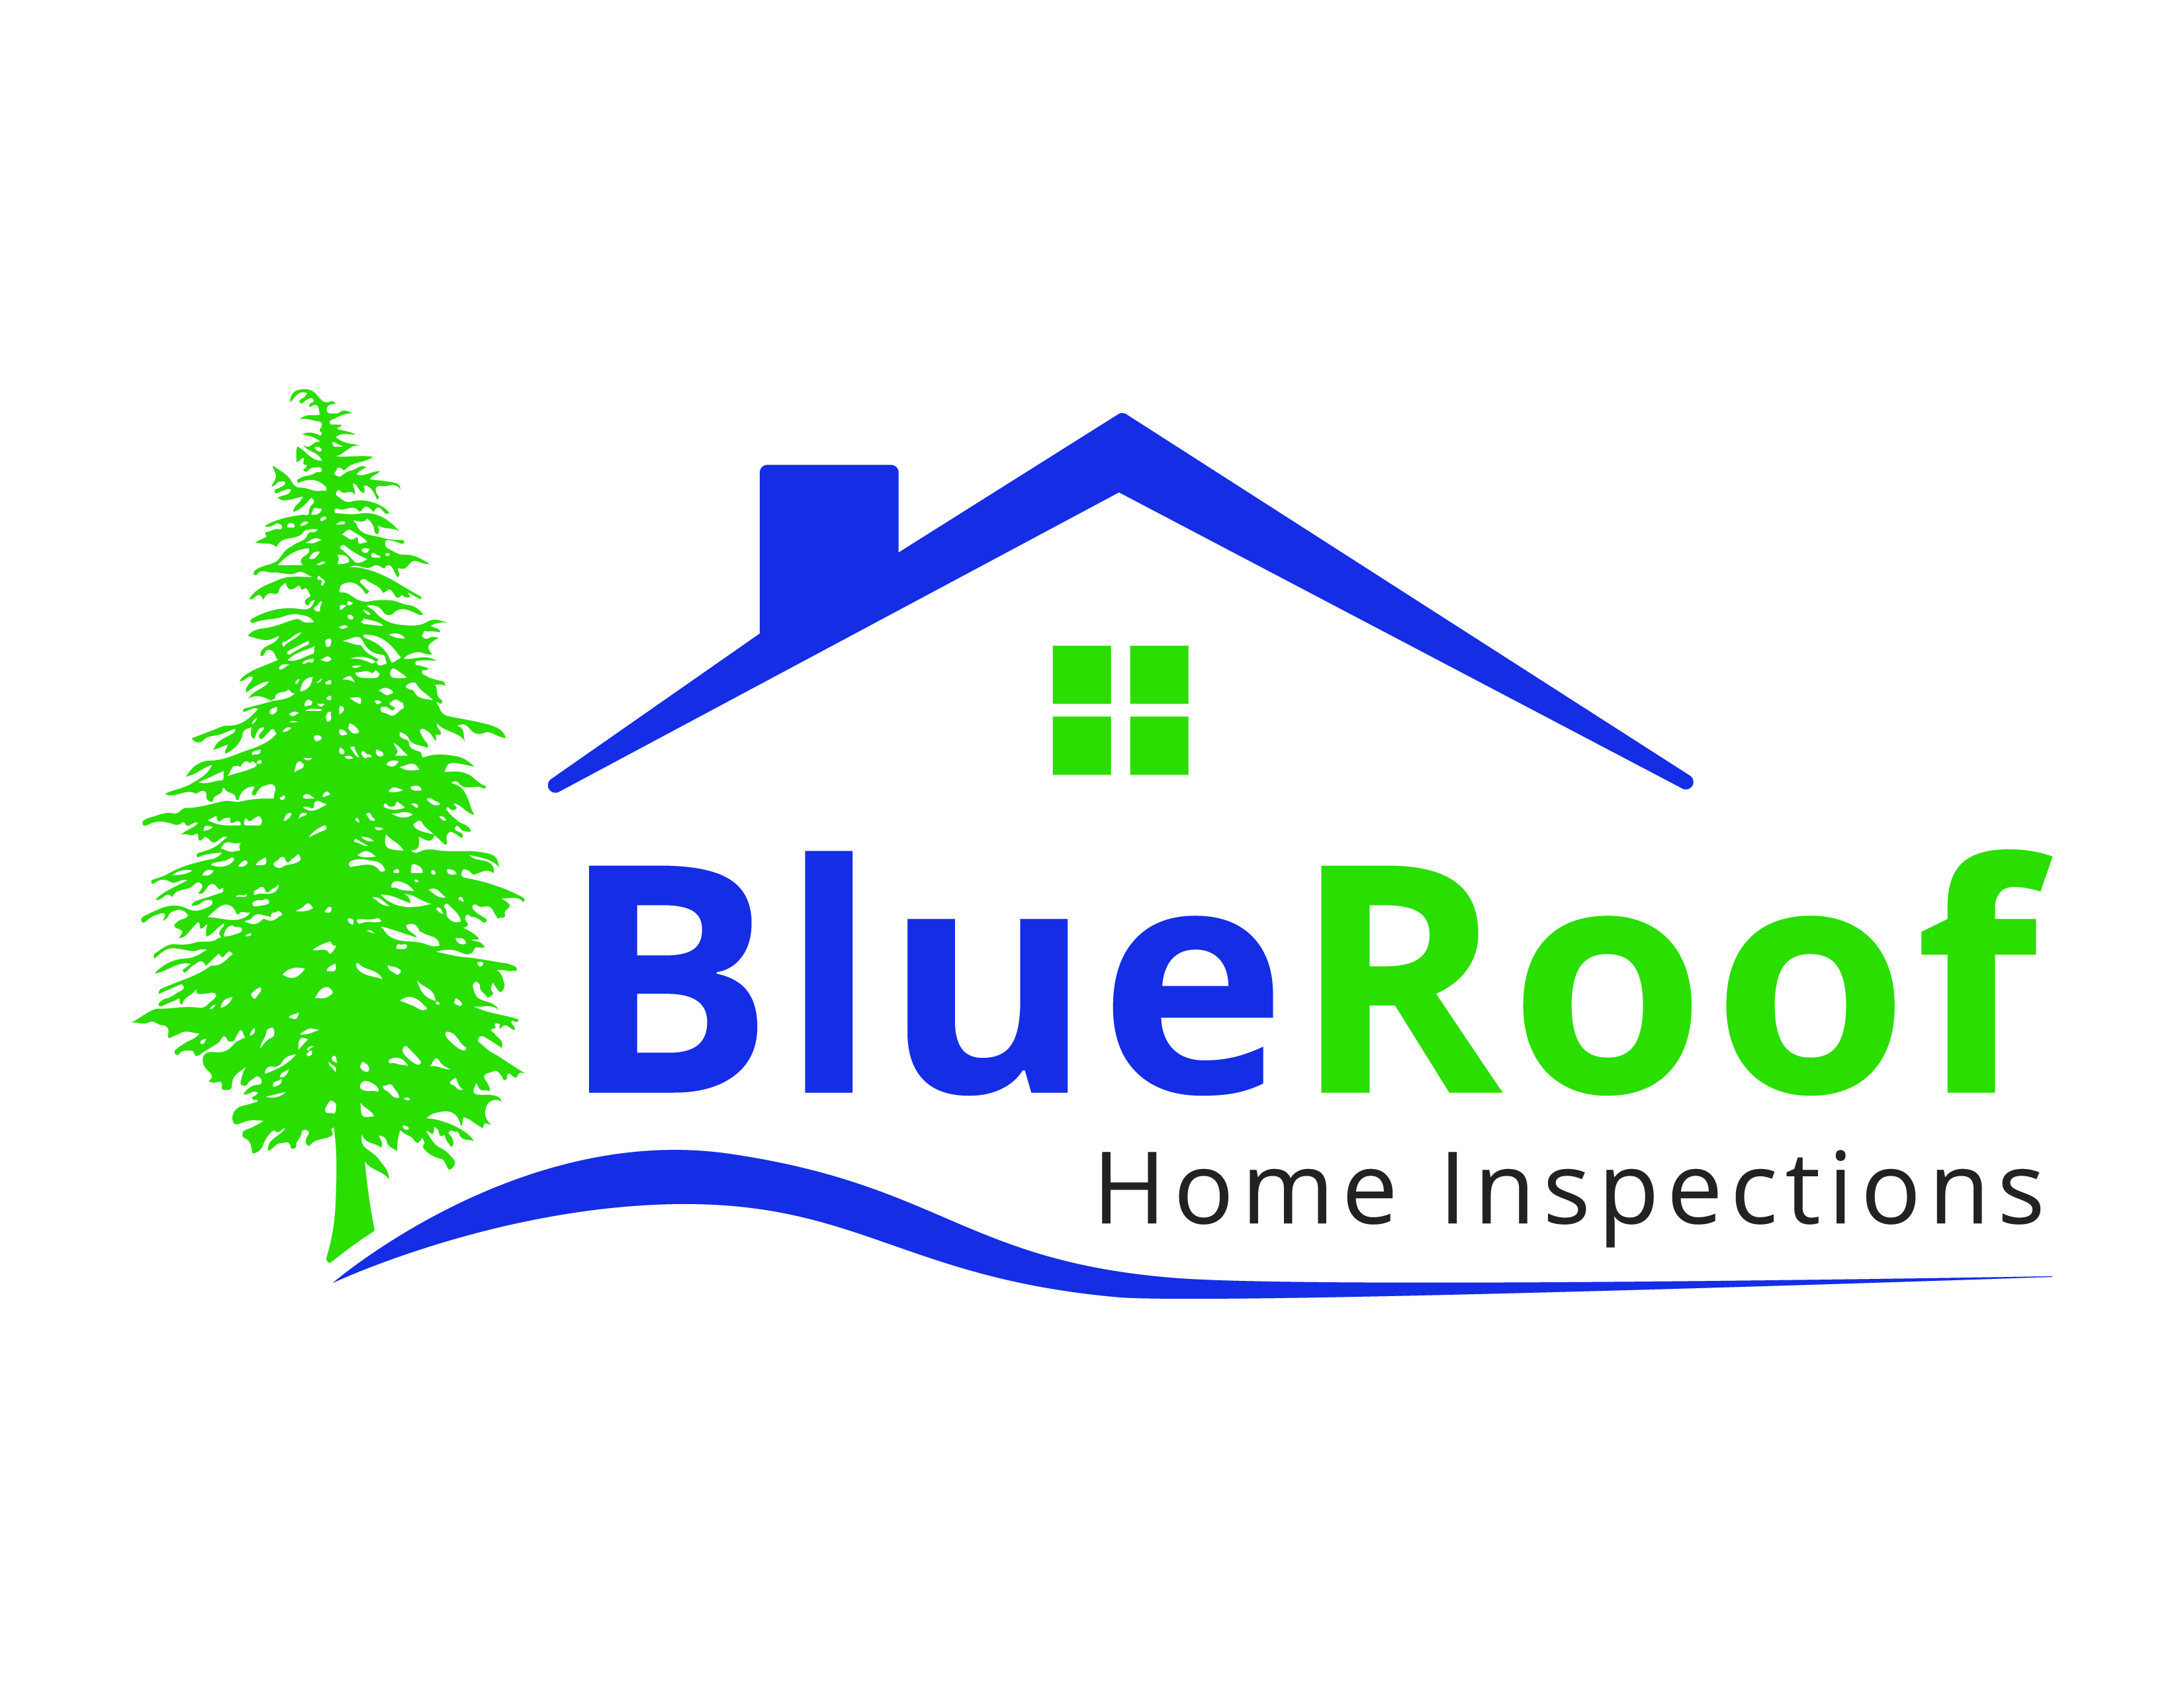 Blue Roof Home Inspections Logo